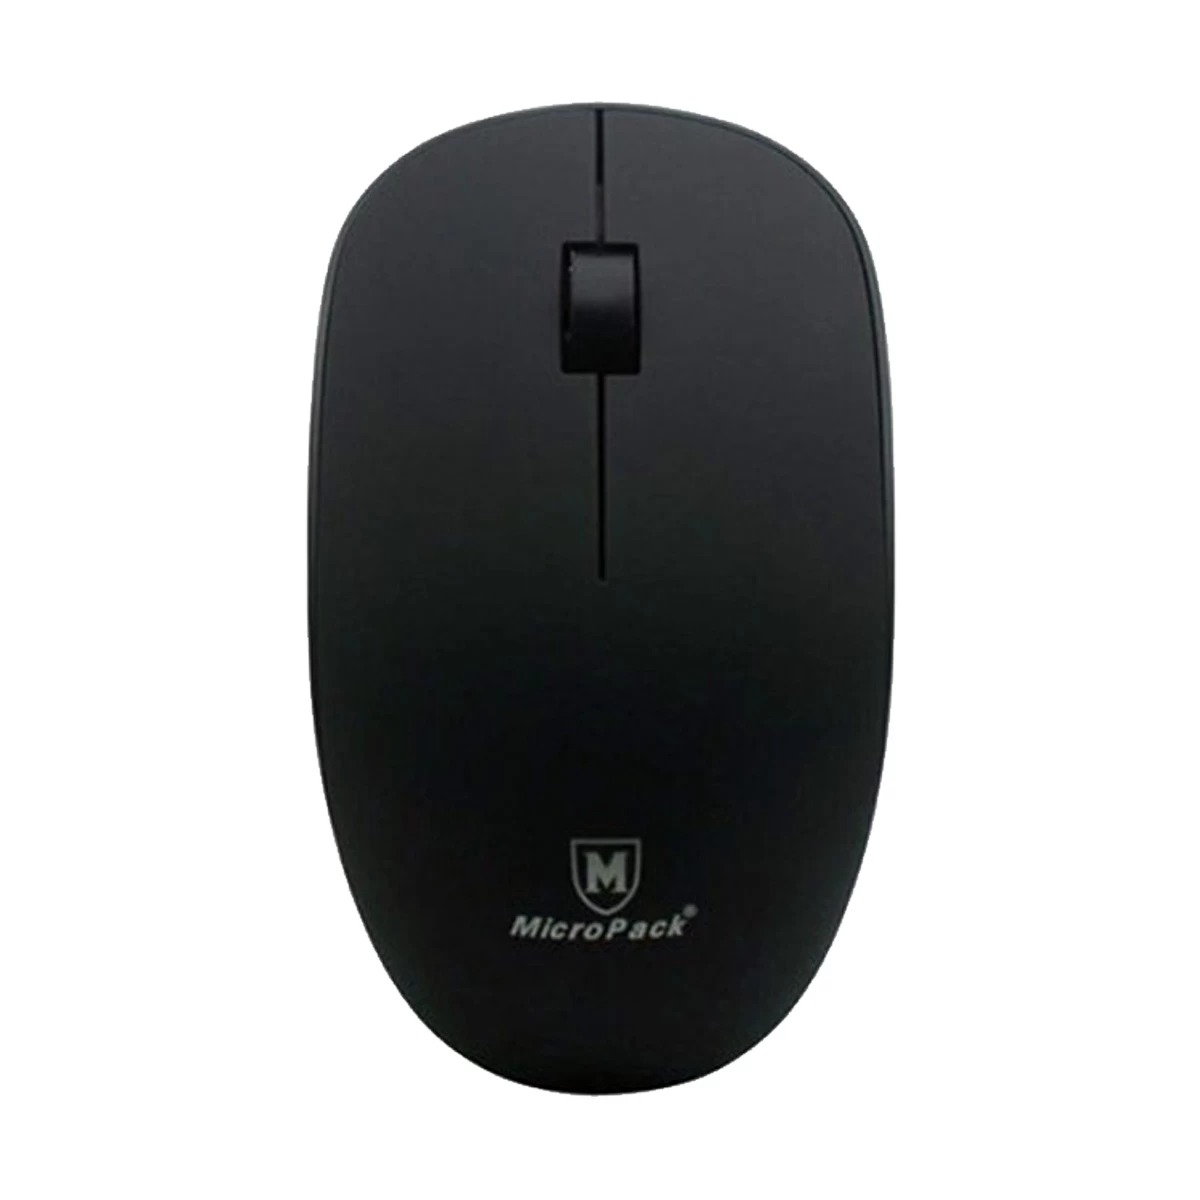 Micropack MP-721W Black Wireless Mouse